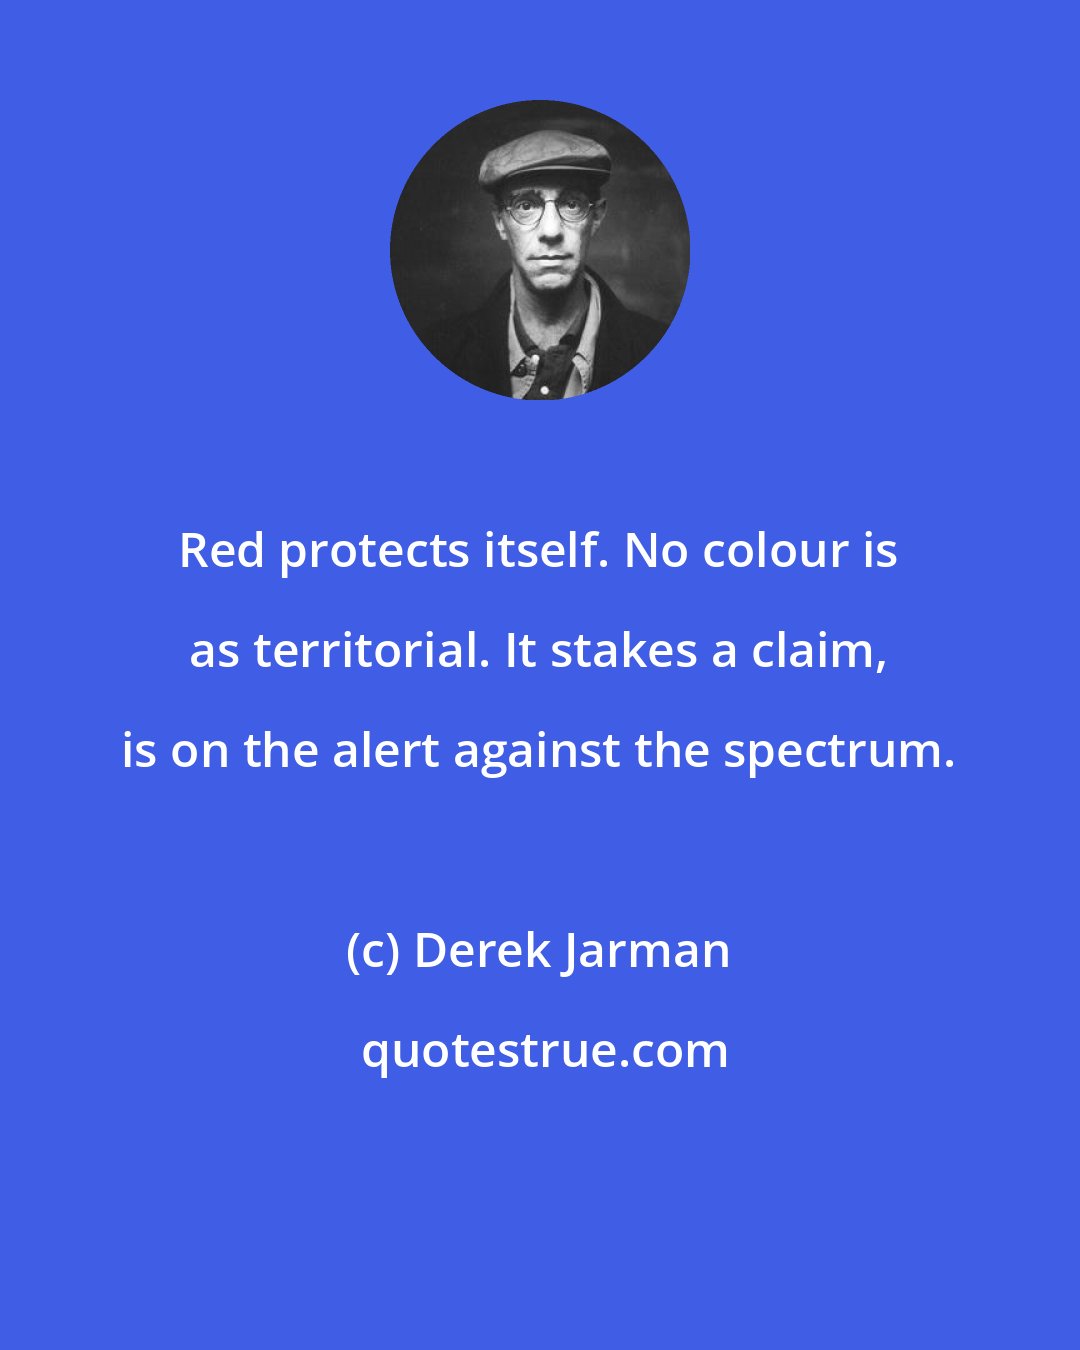 Derek Jarman: Red protects itself. No colour is as territorial. It stakes a claim, is on the alert against the spectrum.